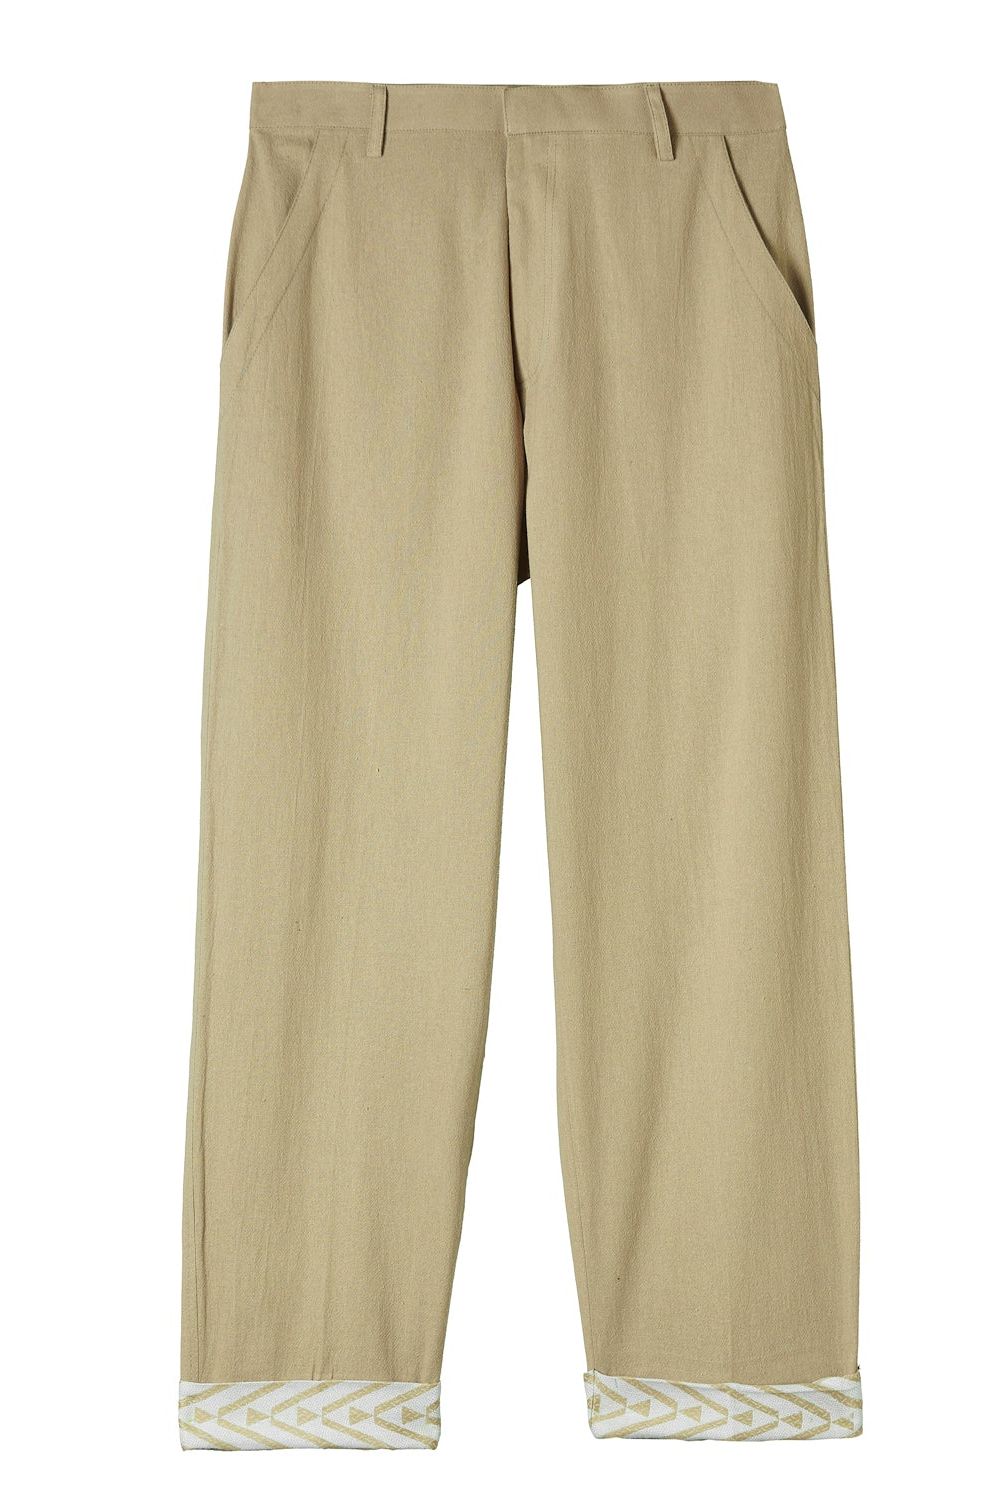 Elevated Essentials - Wide Fit Beige Pants